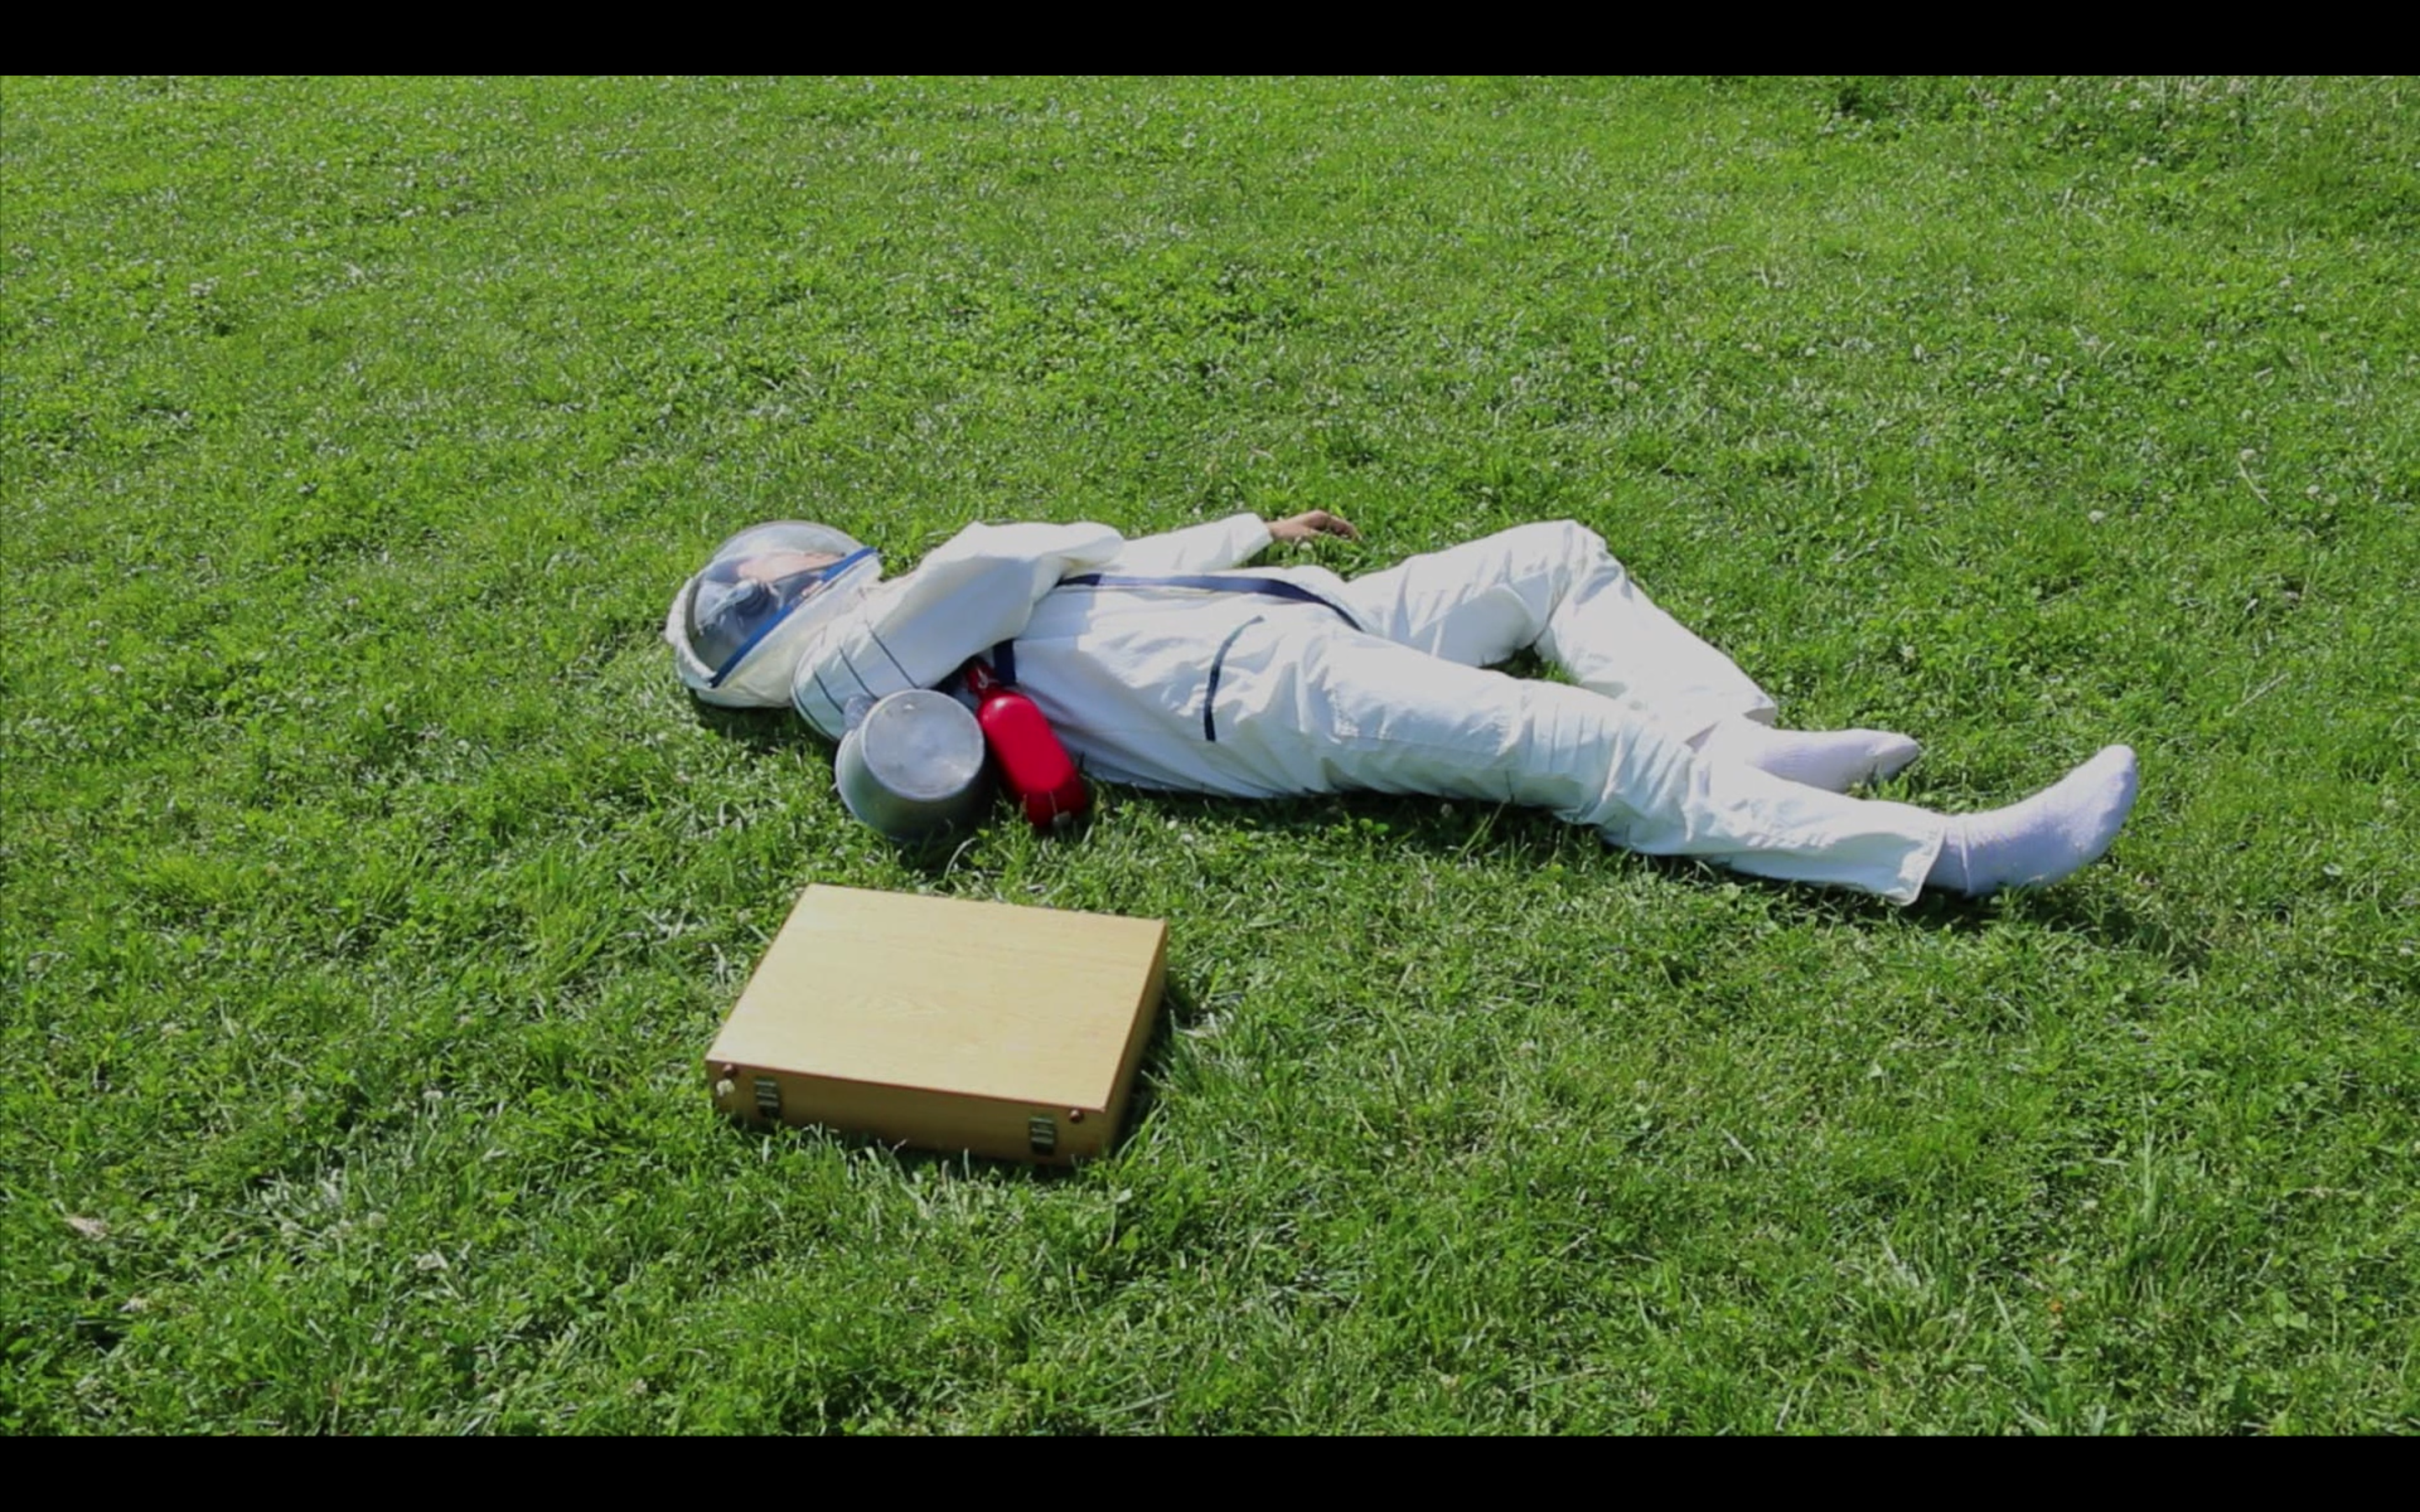 Image: A video still of a cosmonaut wearing a white space suit and helmet is laying on their back on a grassy green field with one arm across their chest. A tan briefcase is tilted on its side lays next to the figure. Image courtesy of the artist.